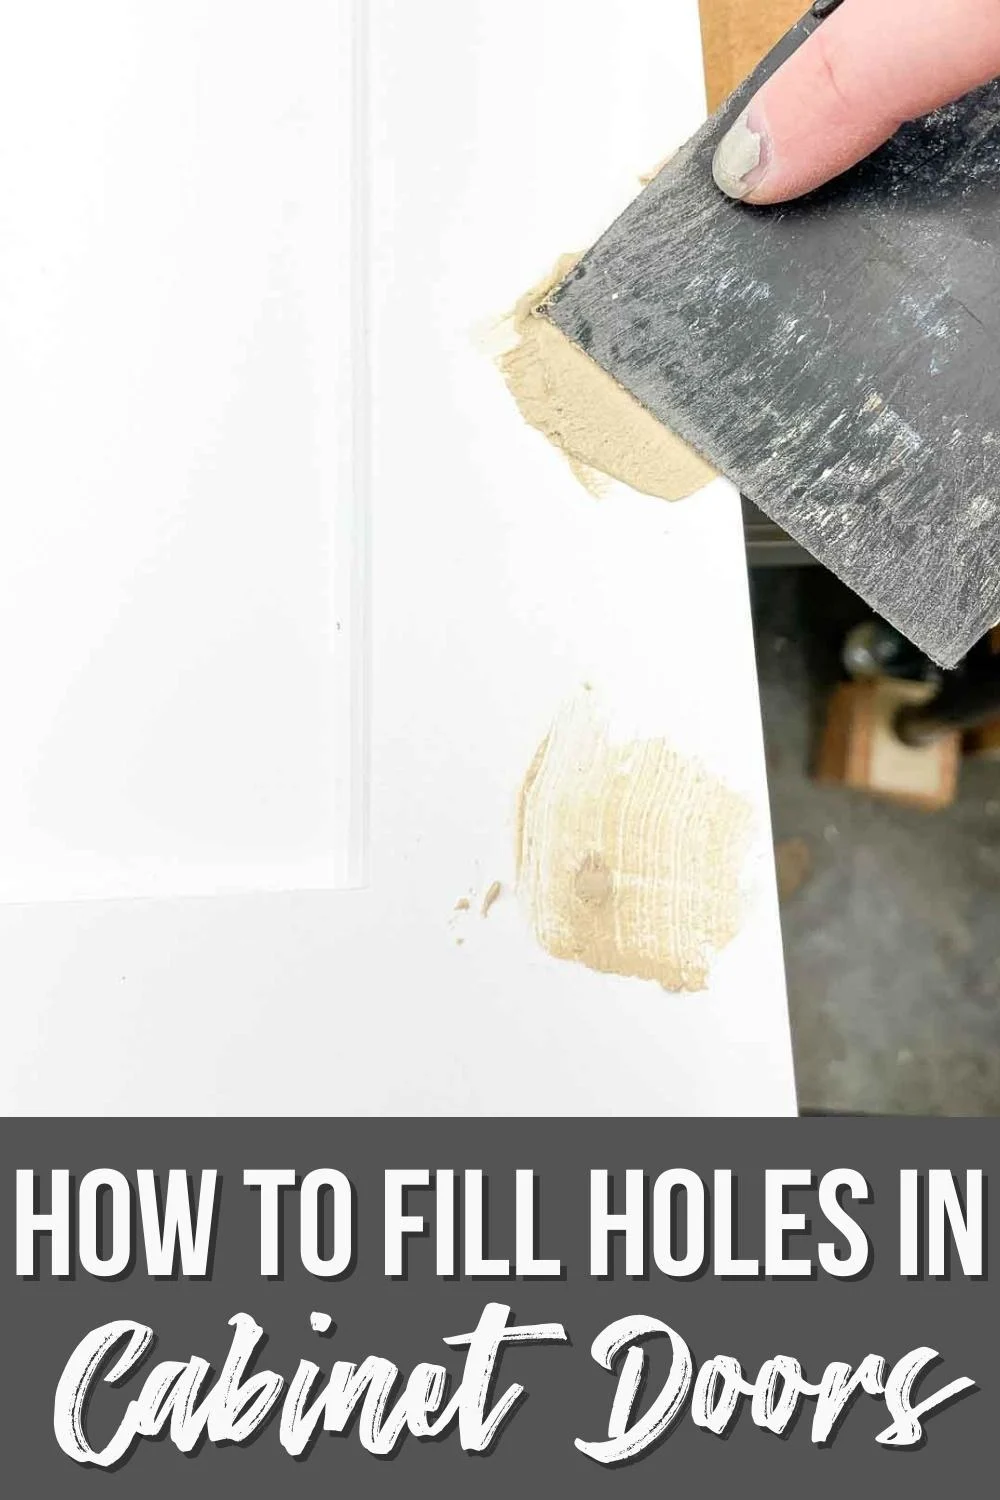 Fill Holes In Cabinet Doors, Fill Holes In Cabinet Doors For New Hinges